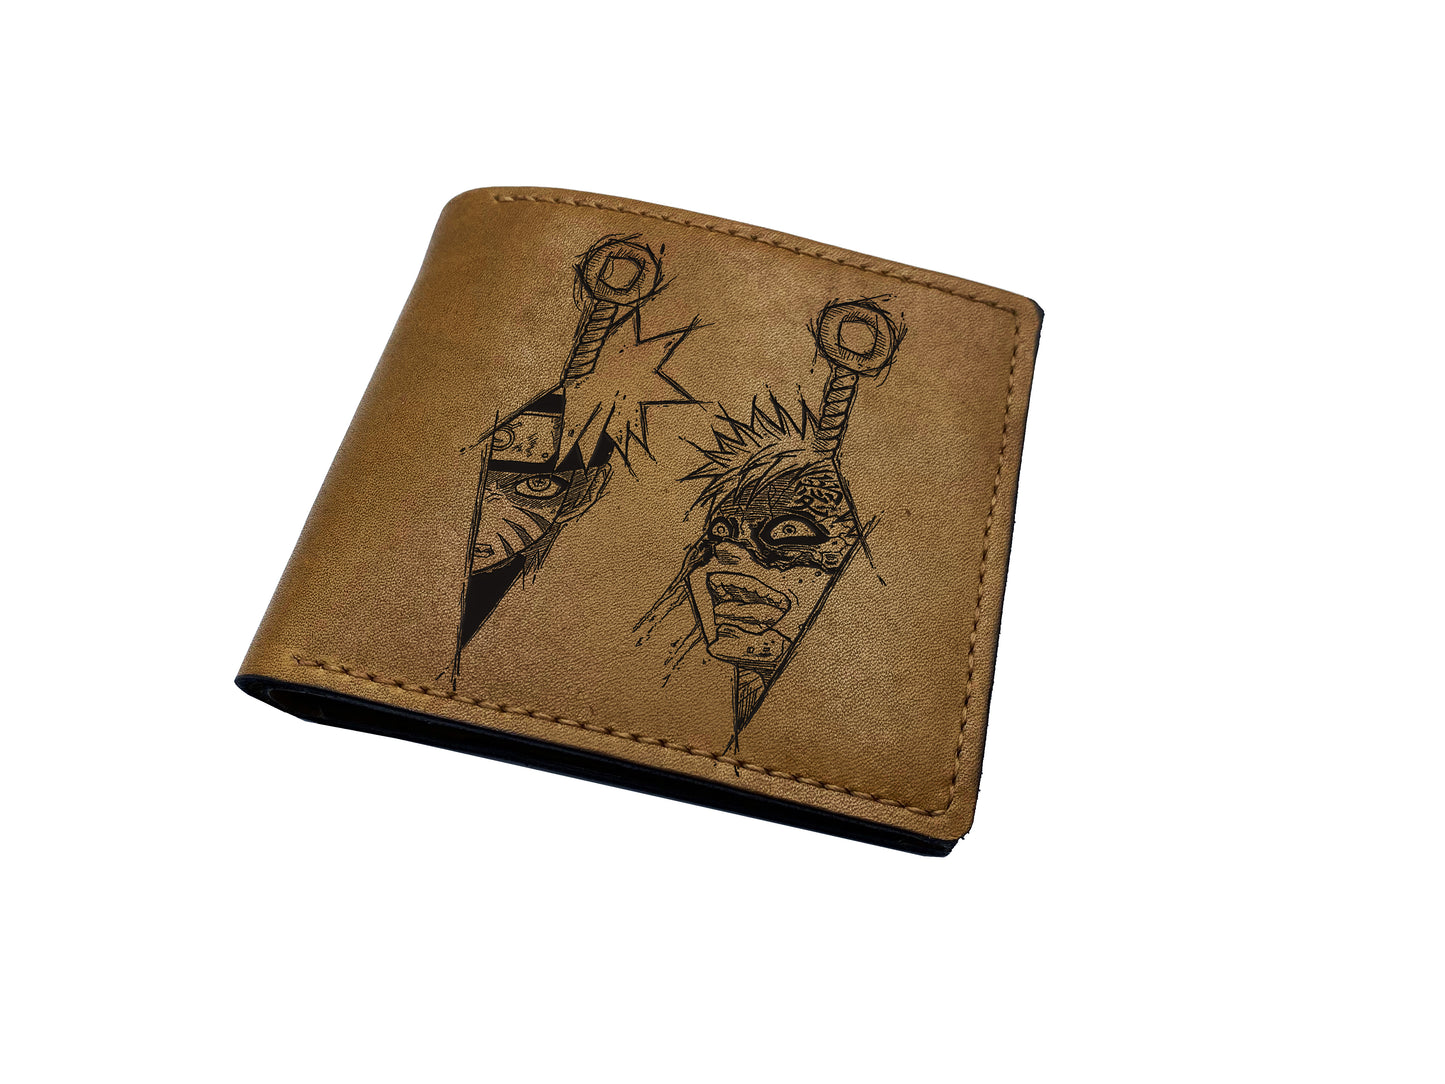 Naruto leather men's wallet, Anime character leather gift ideas, Naruto wallet for him, birthday gift for boyfriend